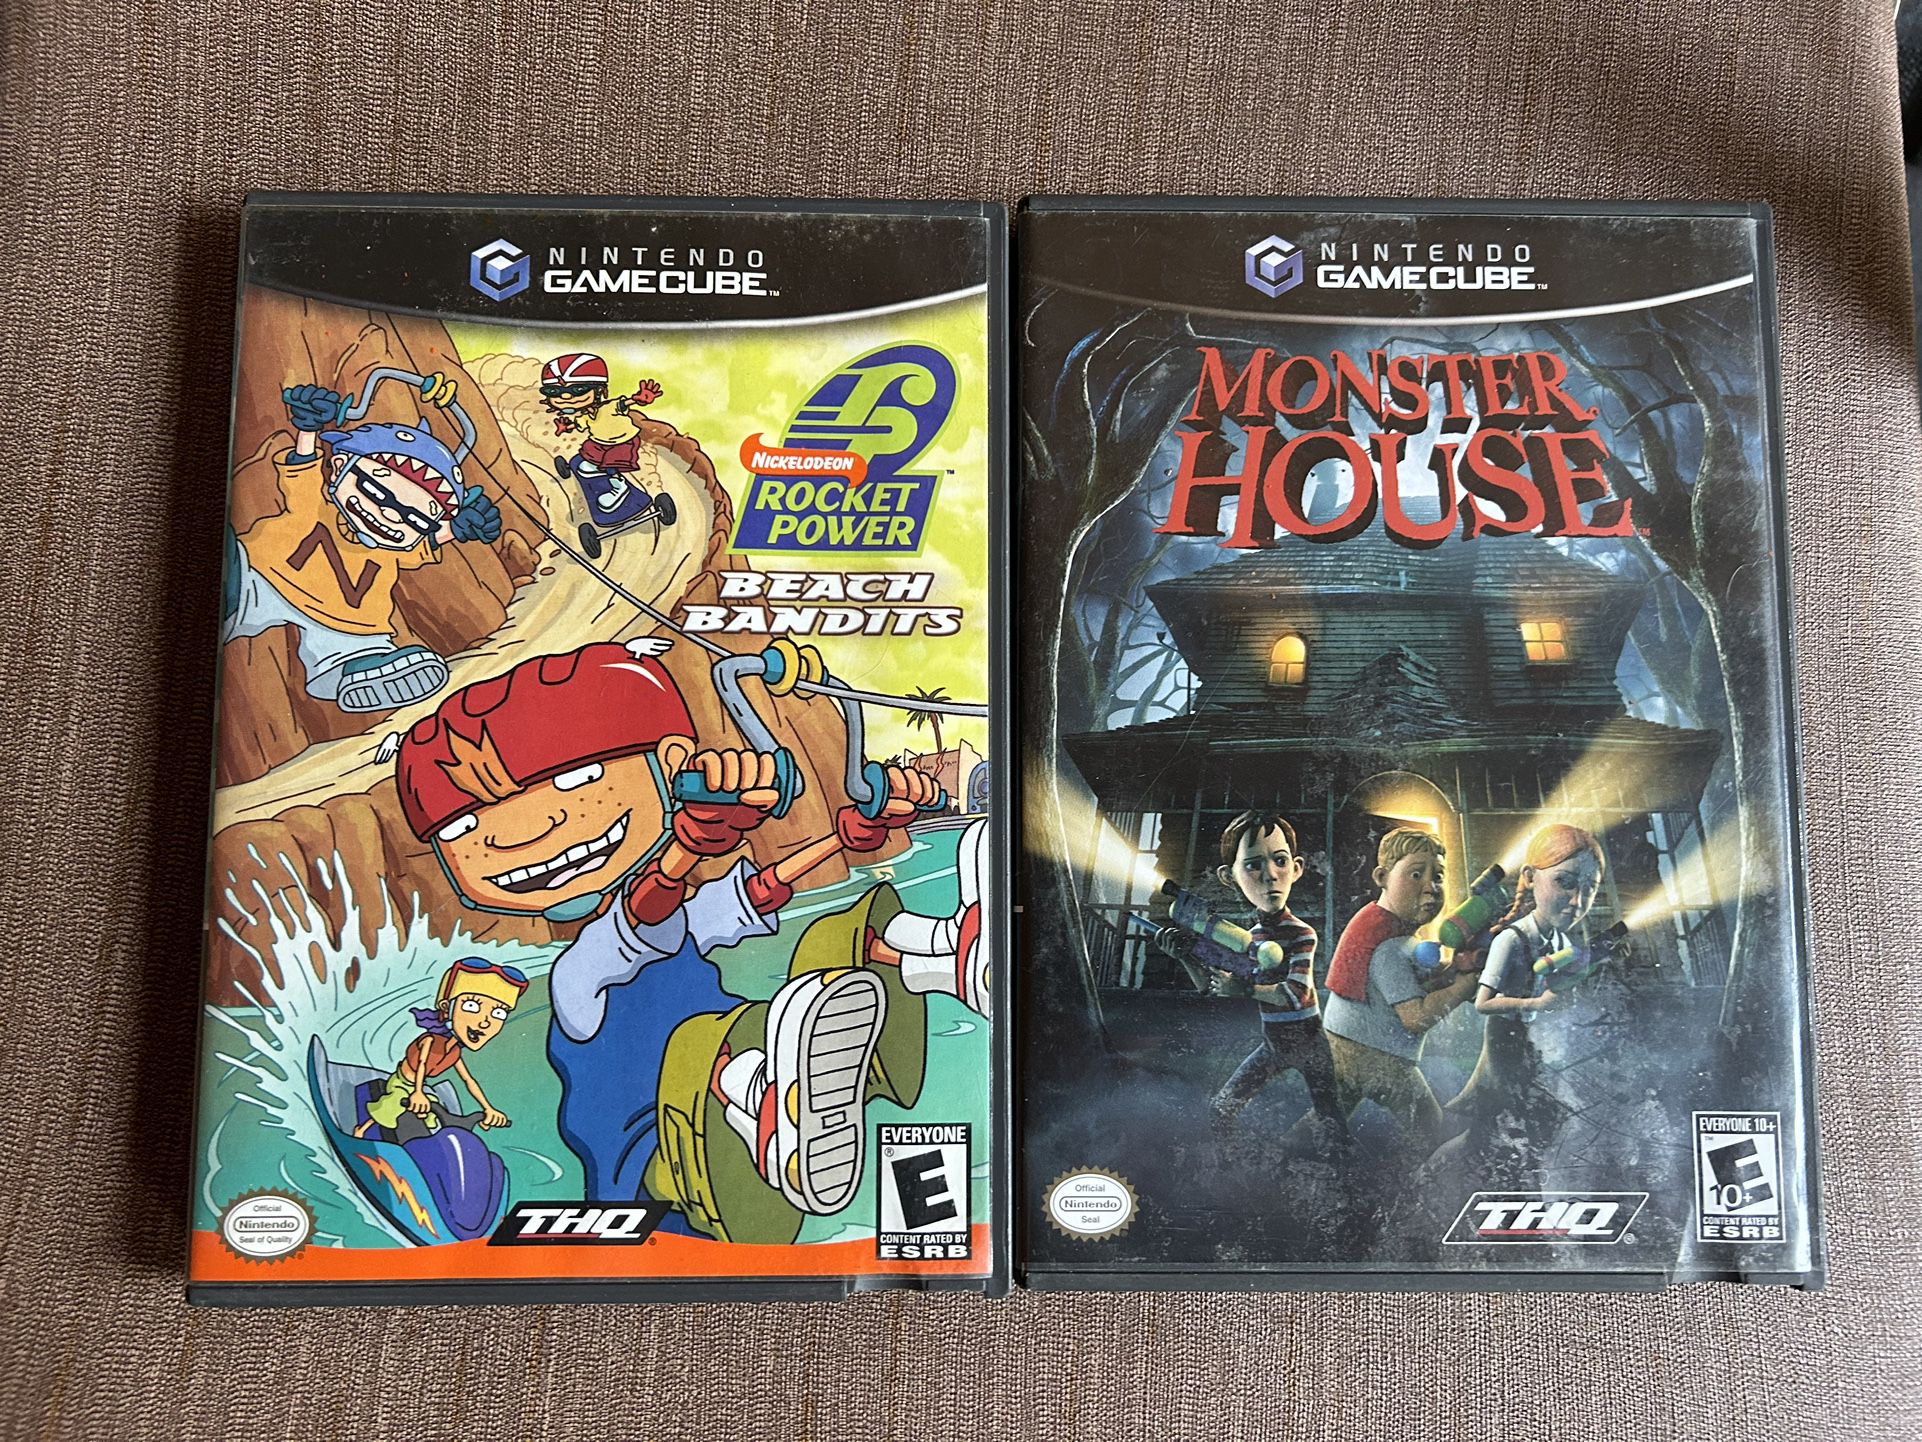 Nintendo GameCube Game Lot Bundle  Both games have been tested and work. I will separate by request or add to the bundle.   Games: Monster House (CIB)